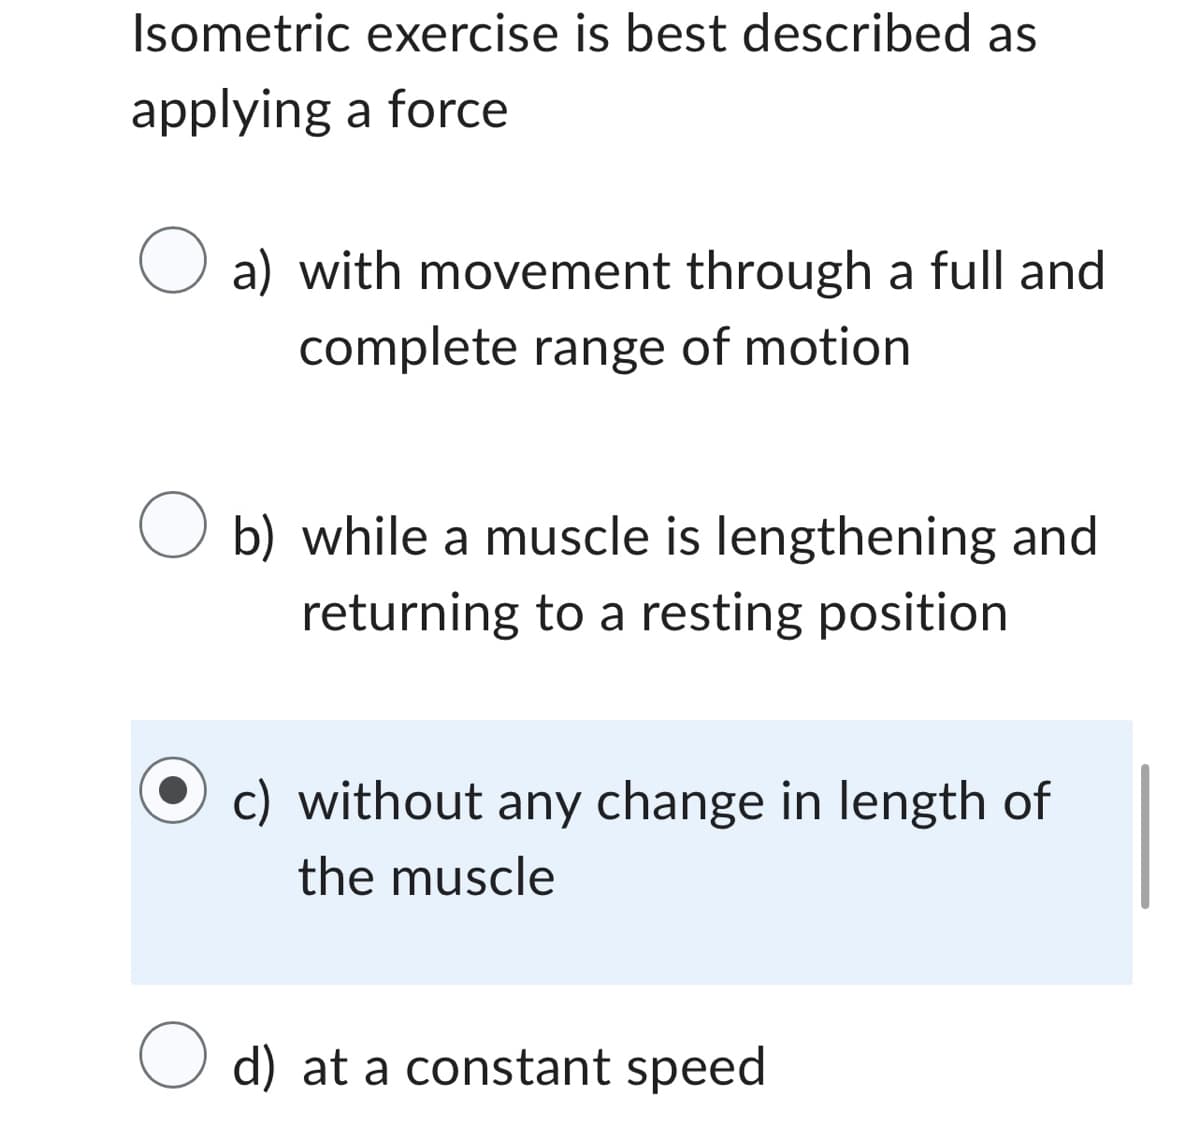 Isometric exercise is best described as
applying a force
O a) with movement through a full and
complete range of motion
O b) while a muscle is lengthening and
returning to a resting position
c) without any change in length of
the muscle
O d) at a constant speed